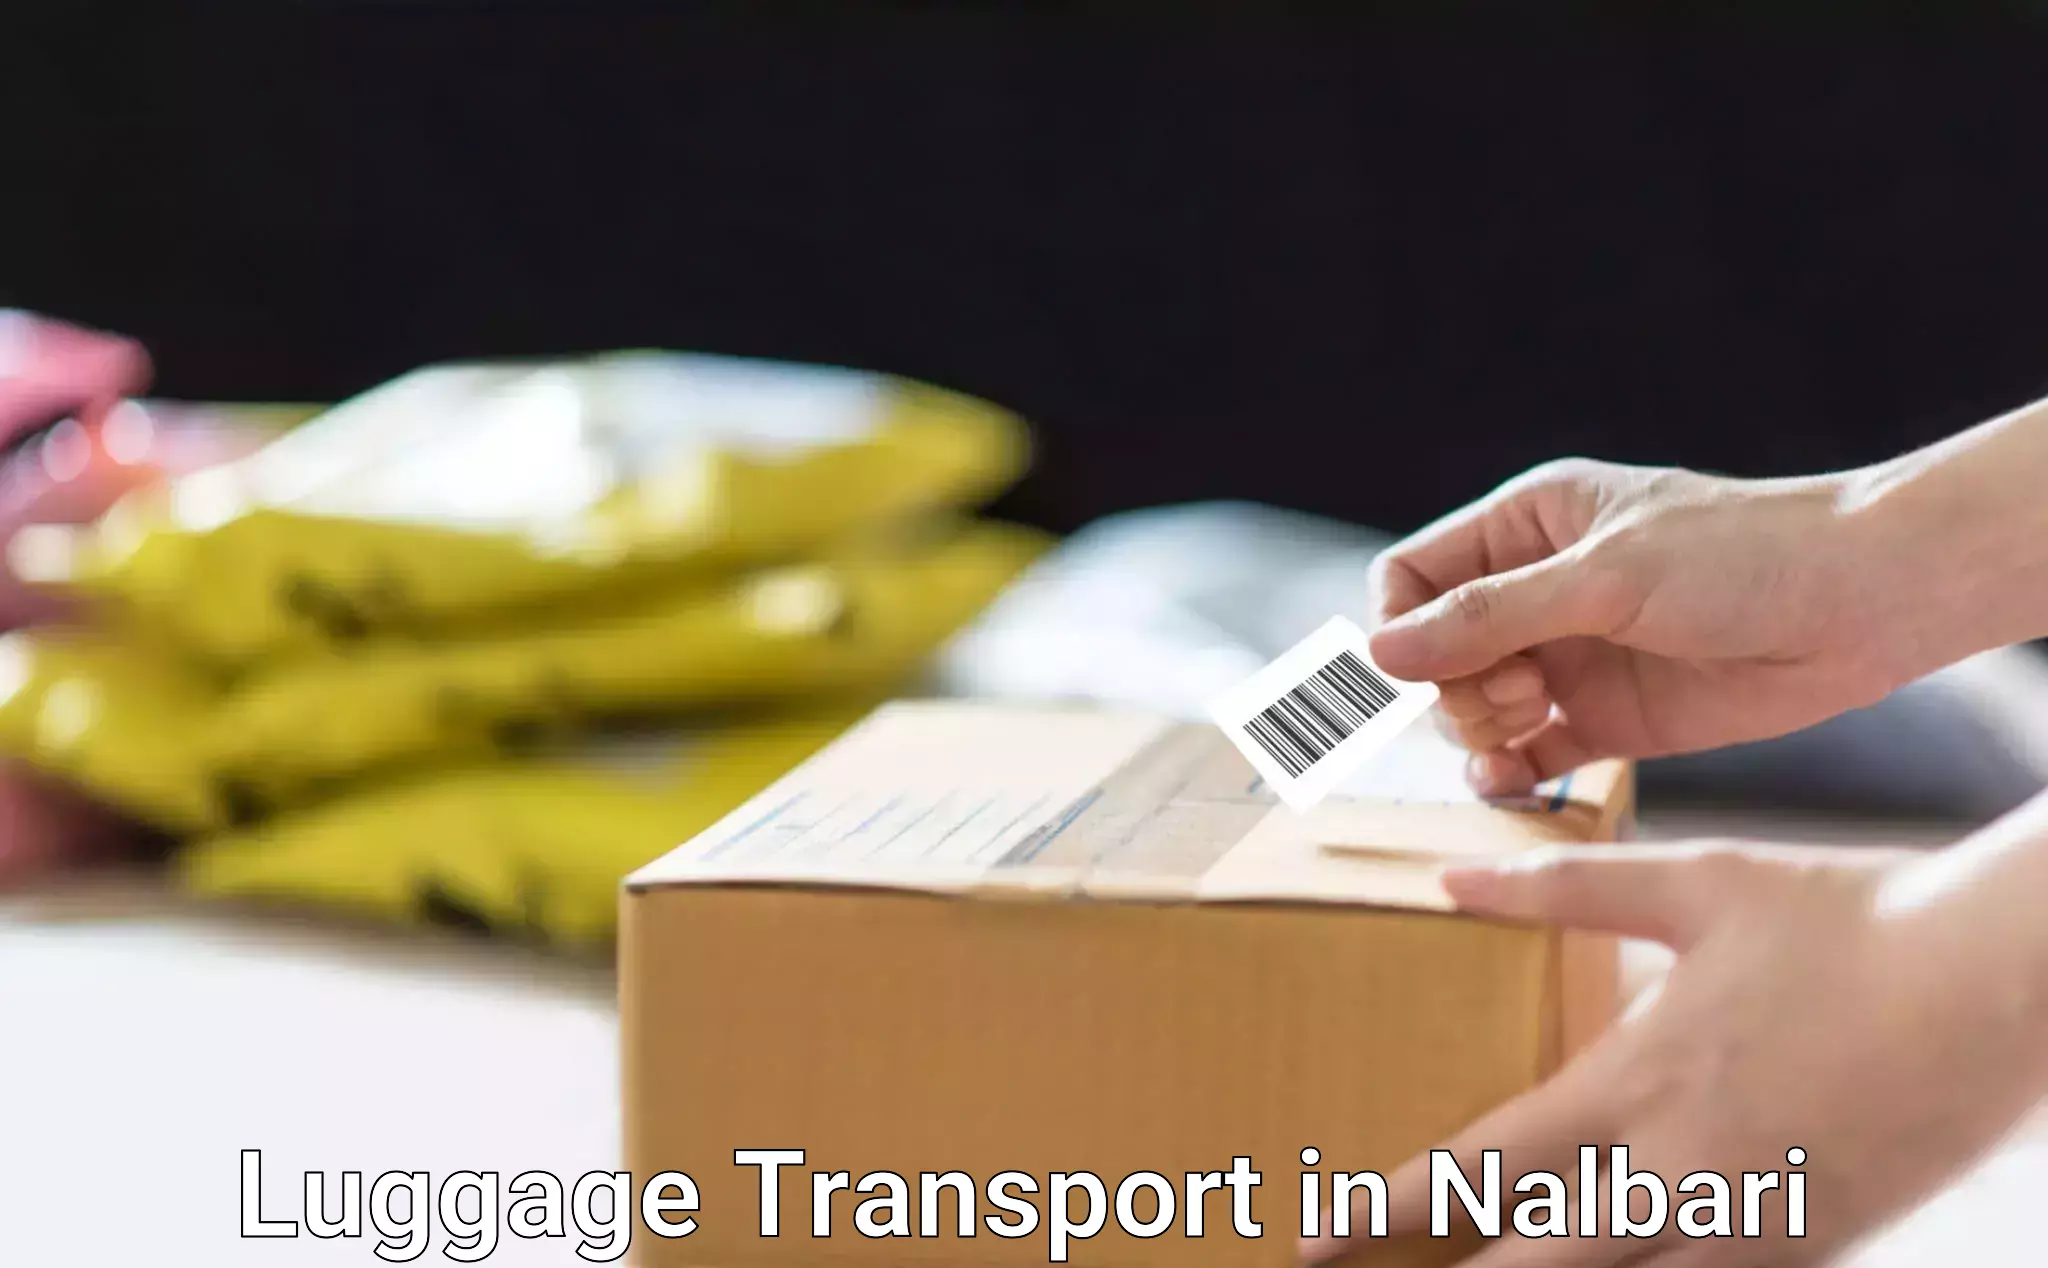 Personal luggage delivery in Nalbari